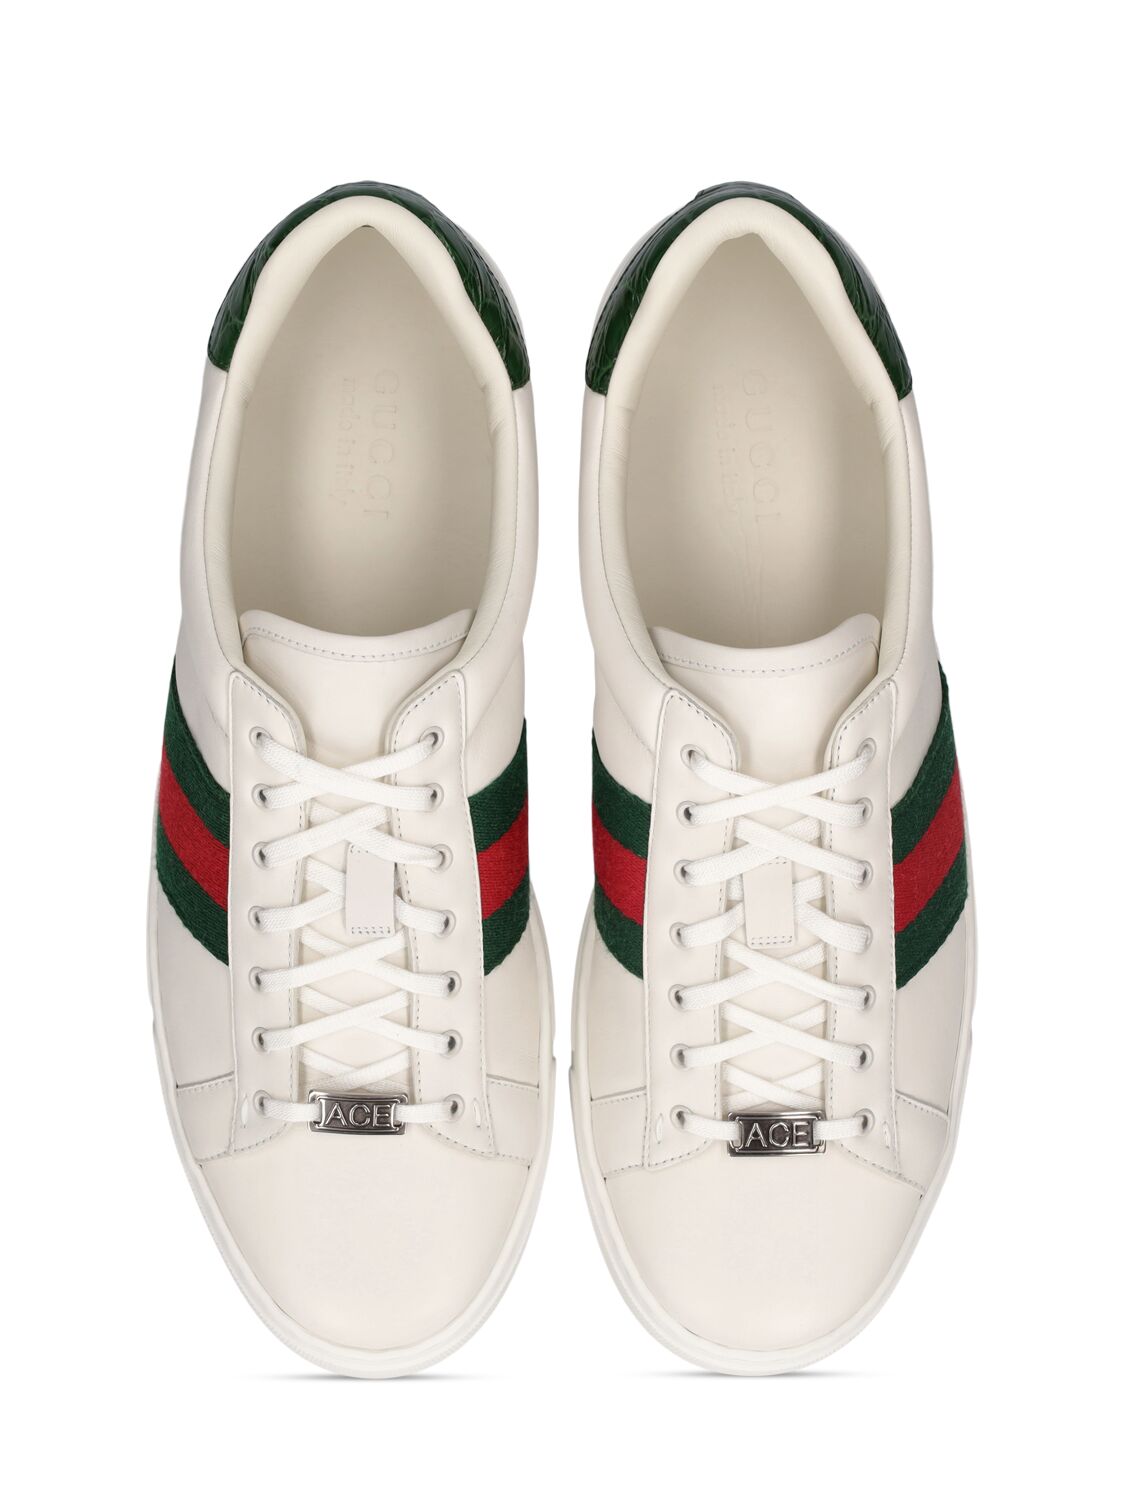 Shop Gucci 30mm Ace Web Detail Leather Sneakers In Weiss,grün